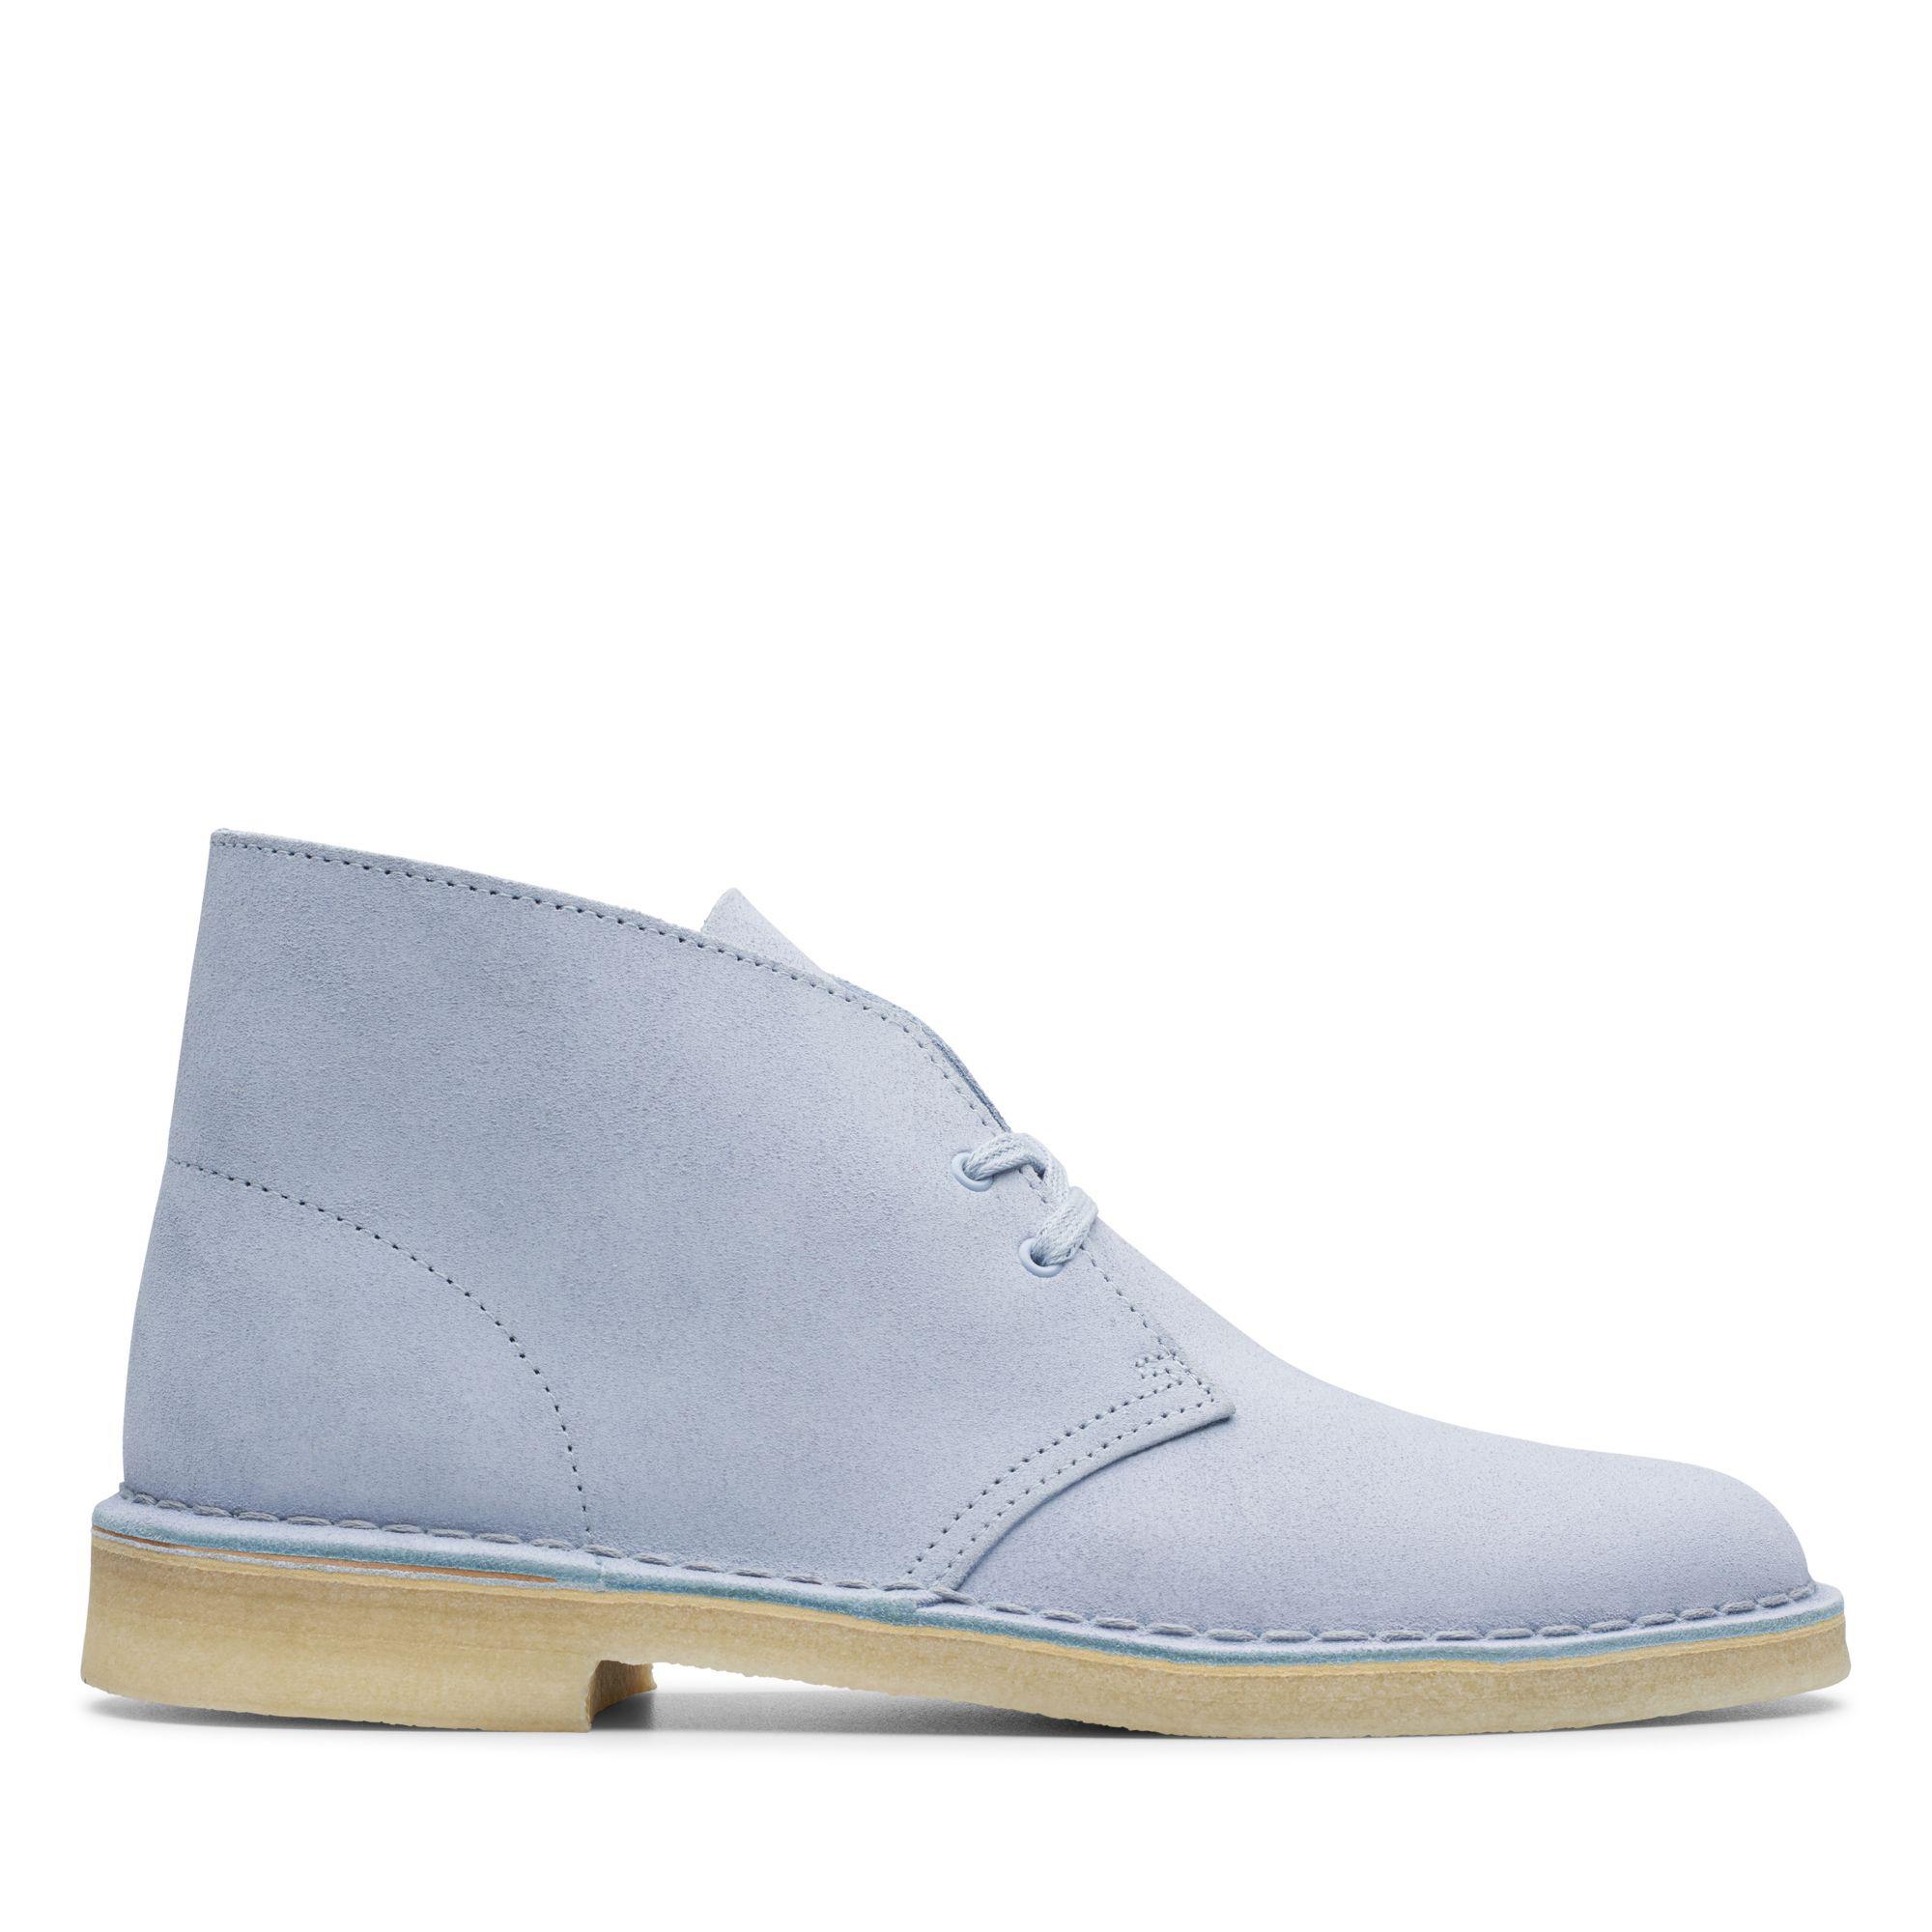 Clarks Suede Desert Boot in Cool Blue 